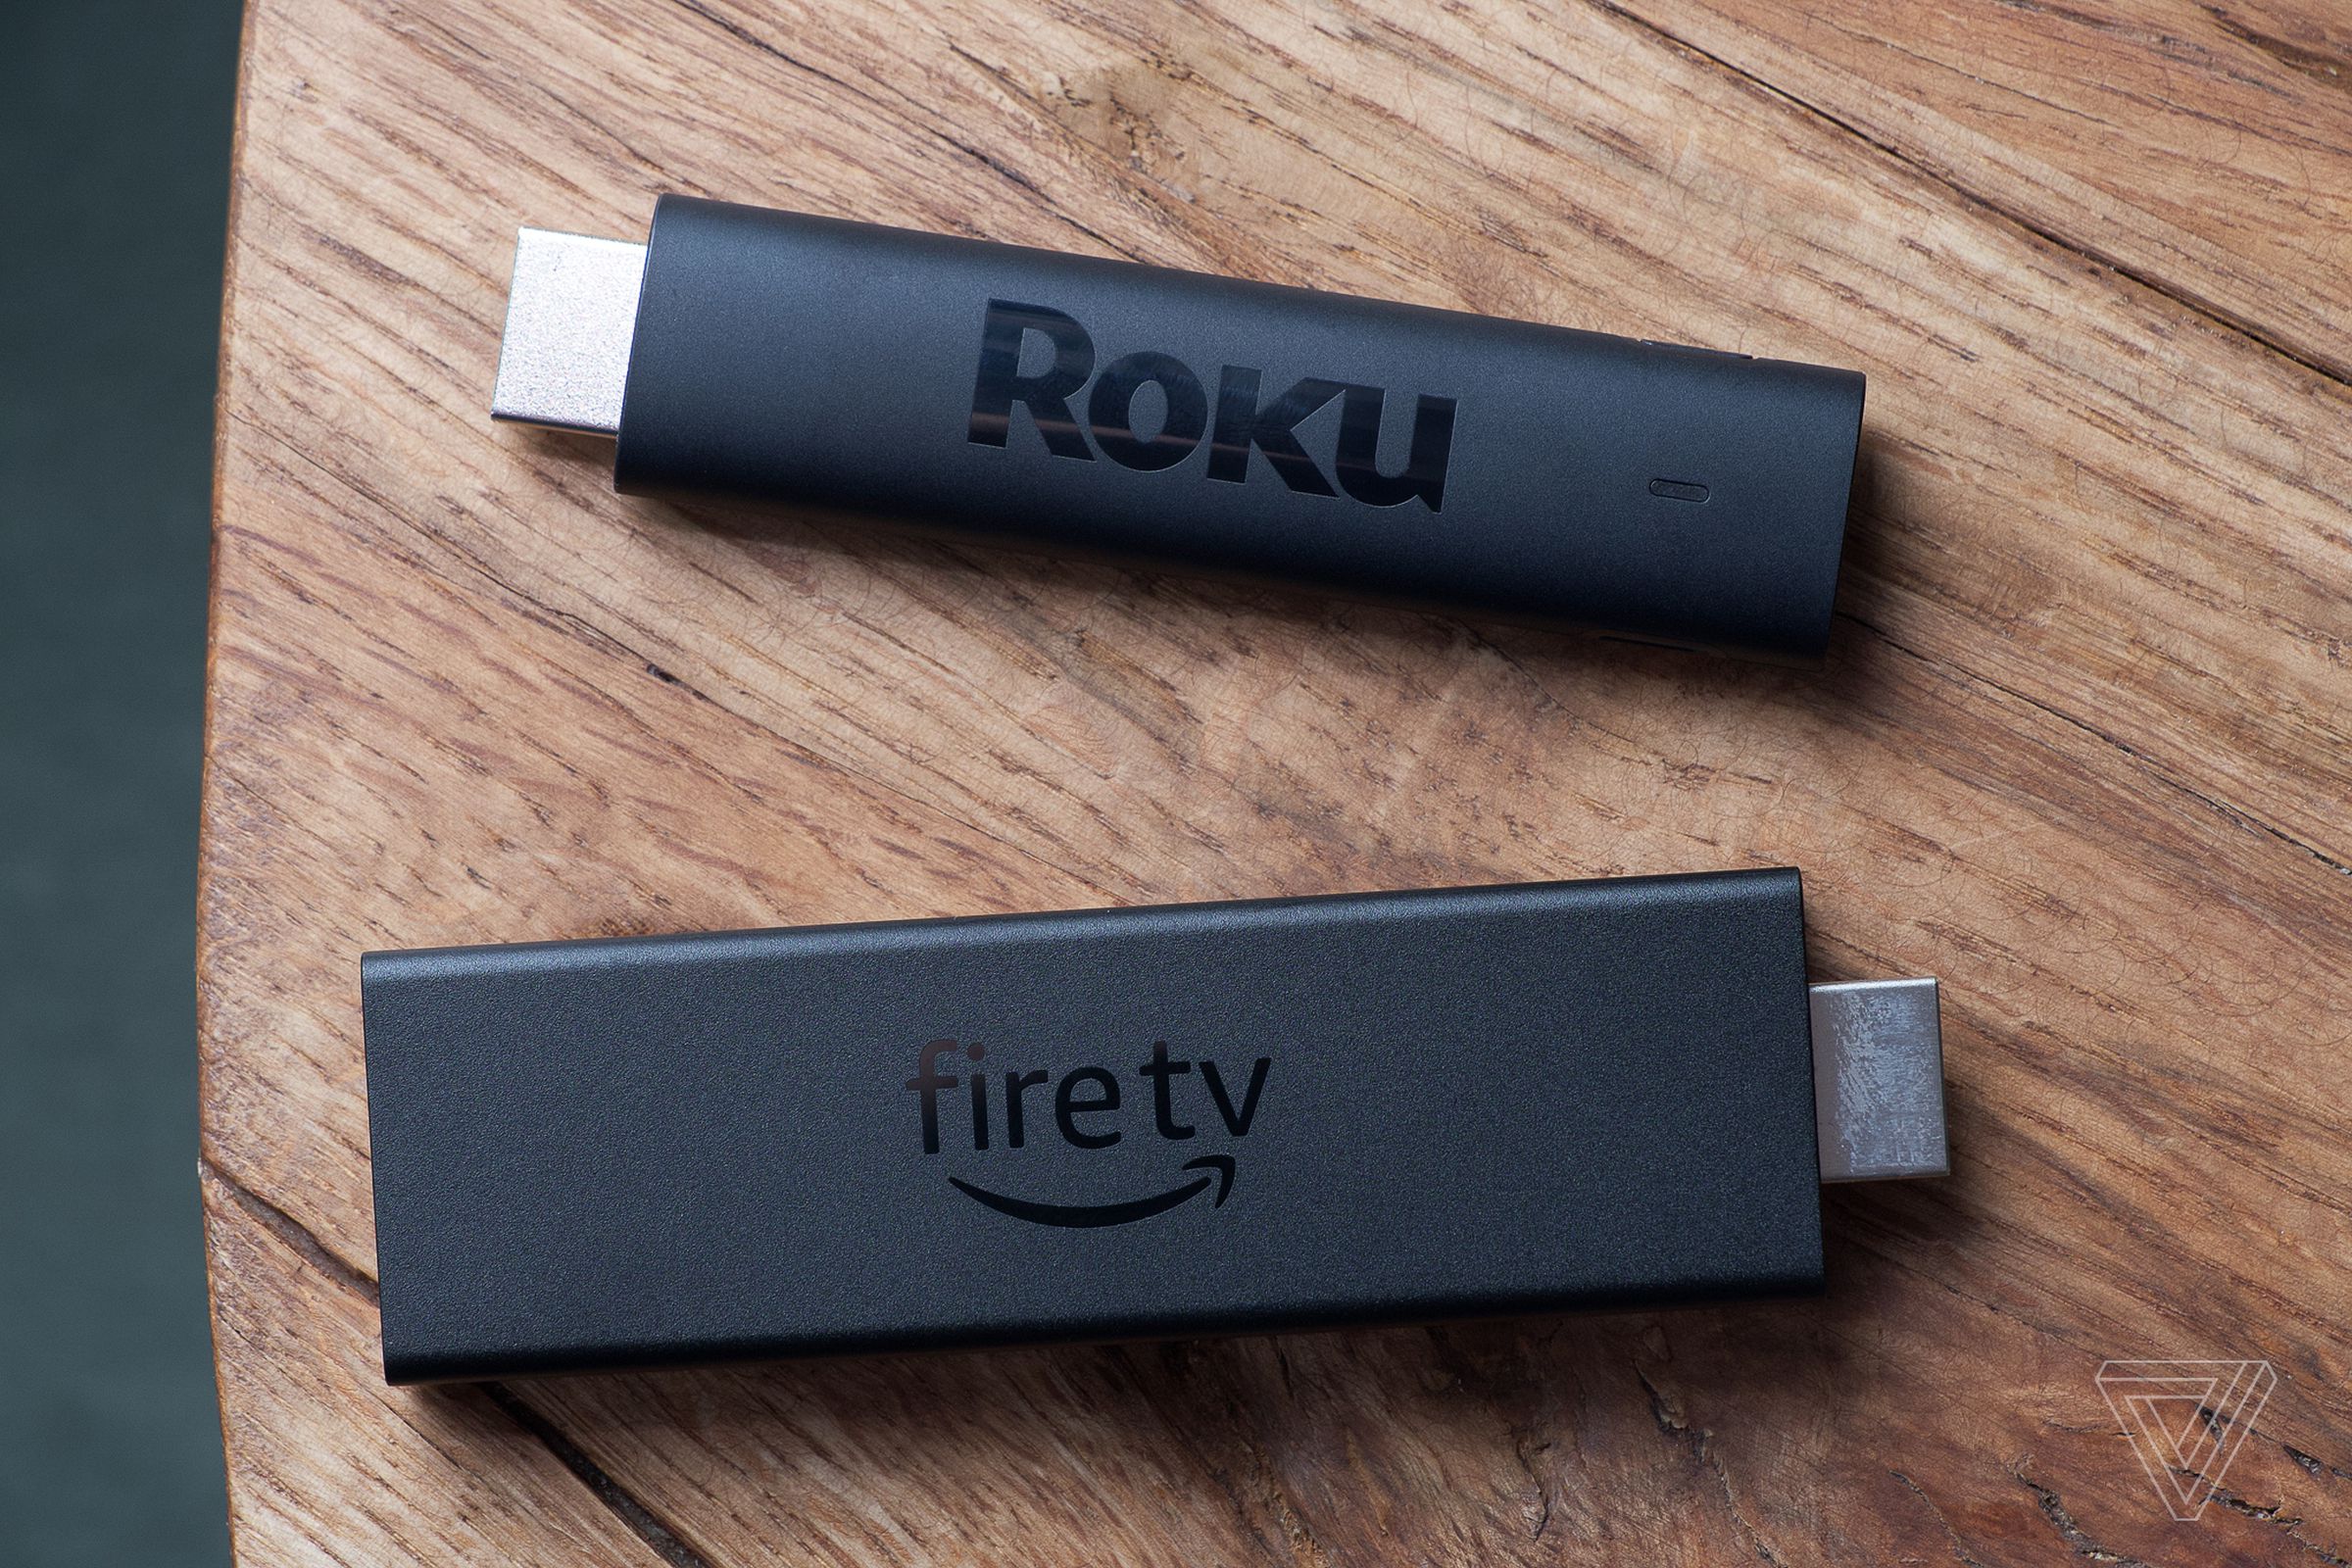 Roku’s Streaming Stick 4K will compete against Amazon’s Fire TV Stick 4K Max.